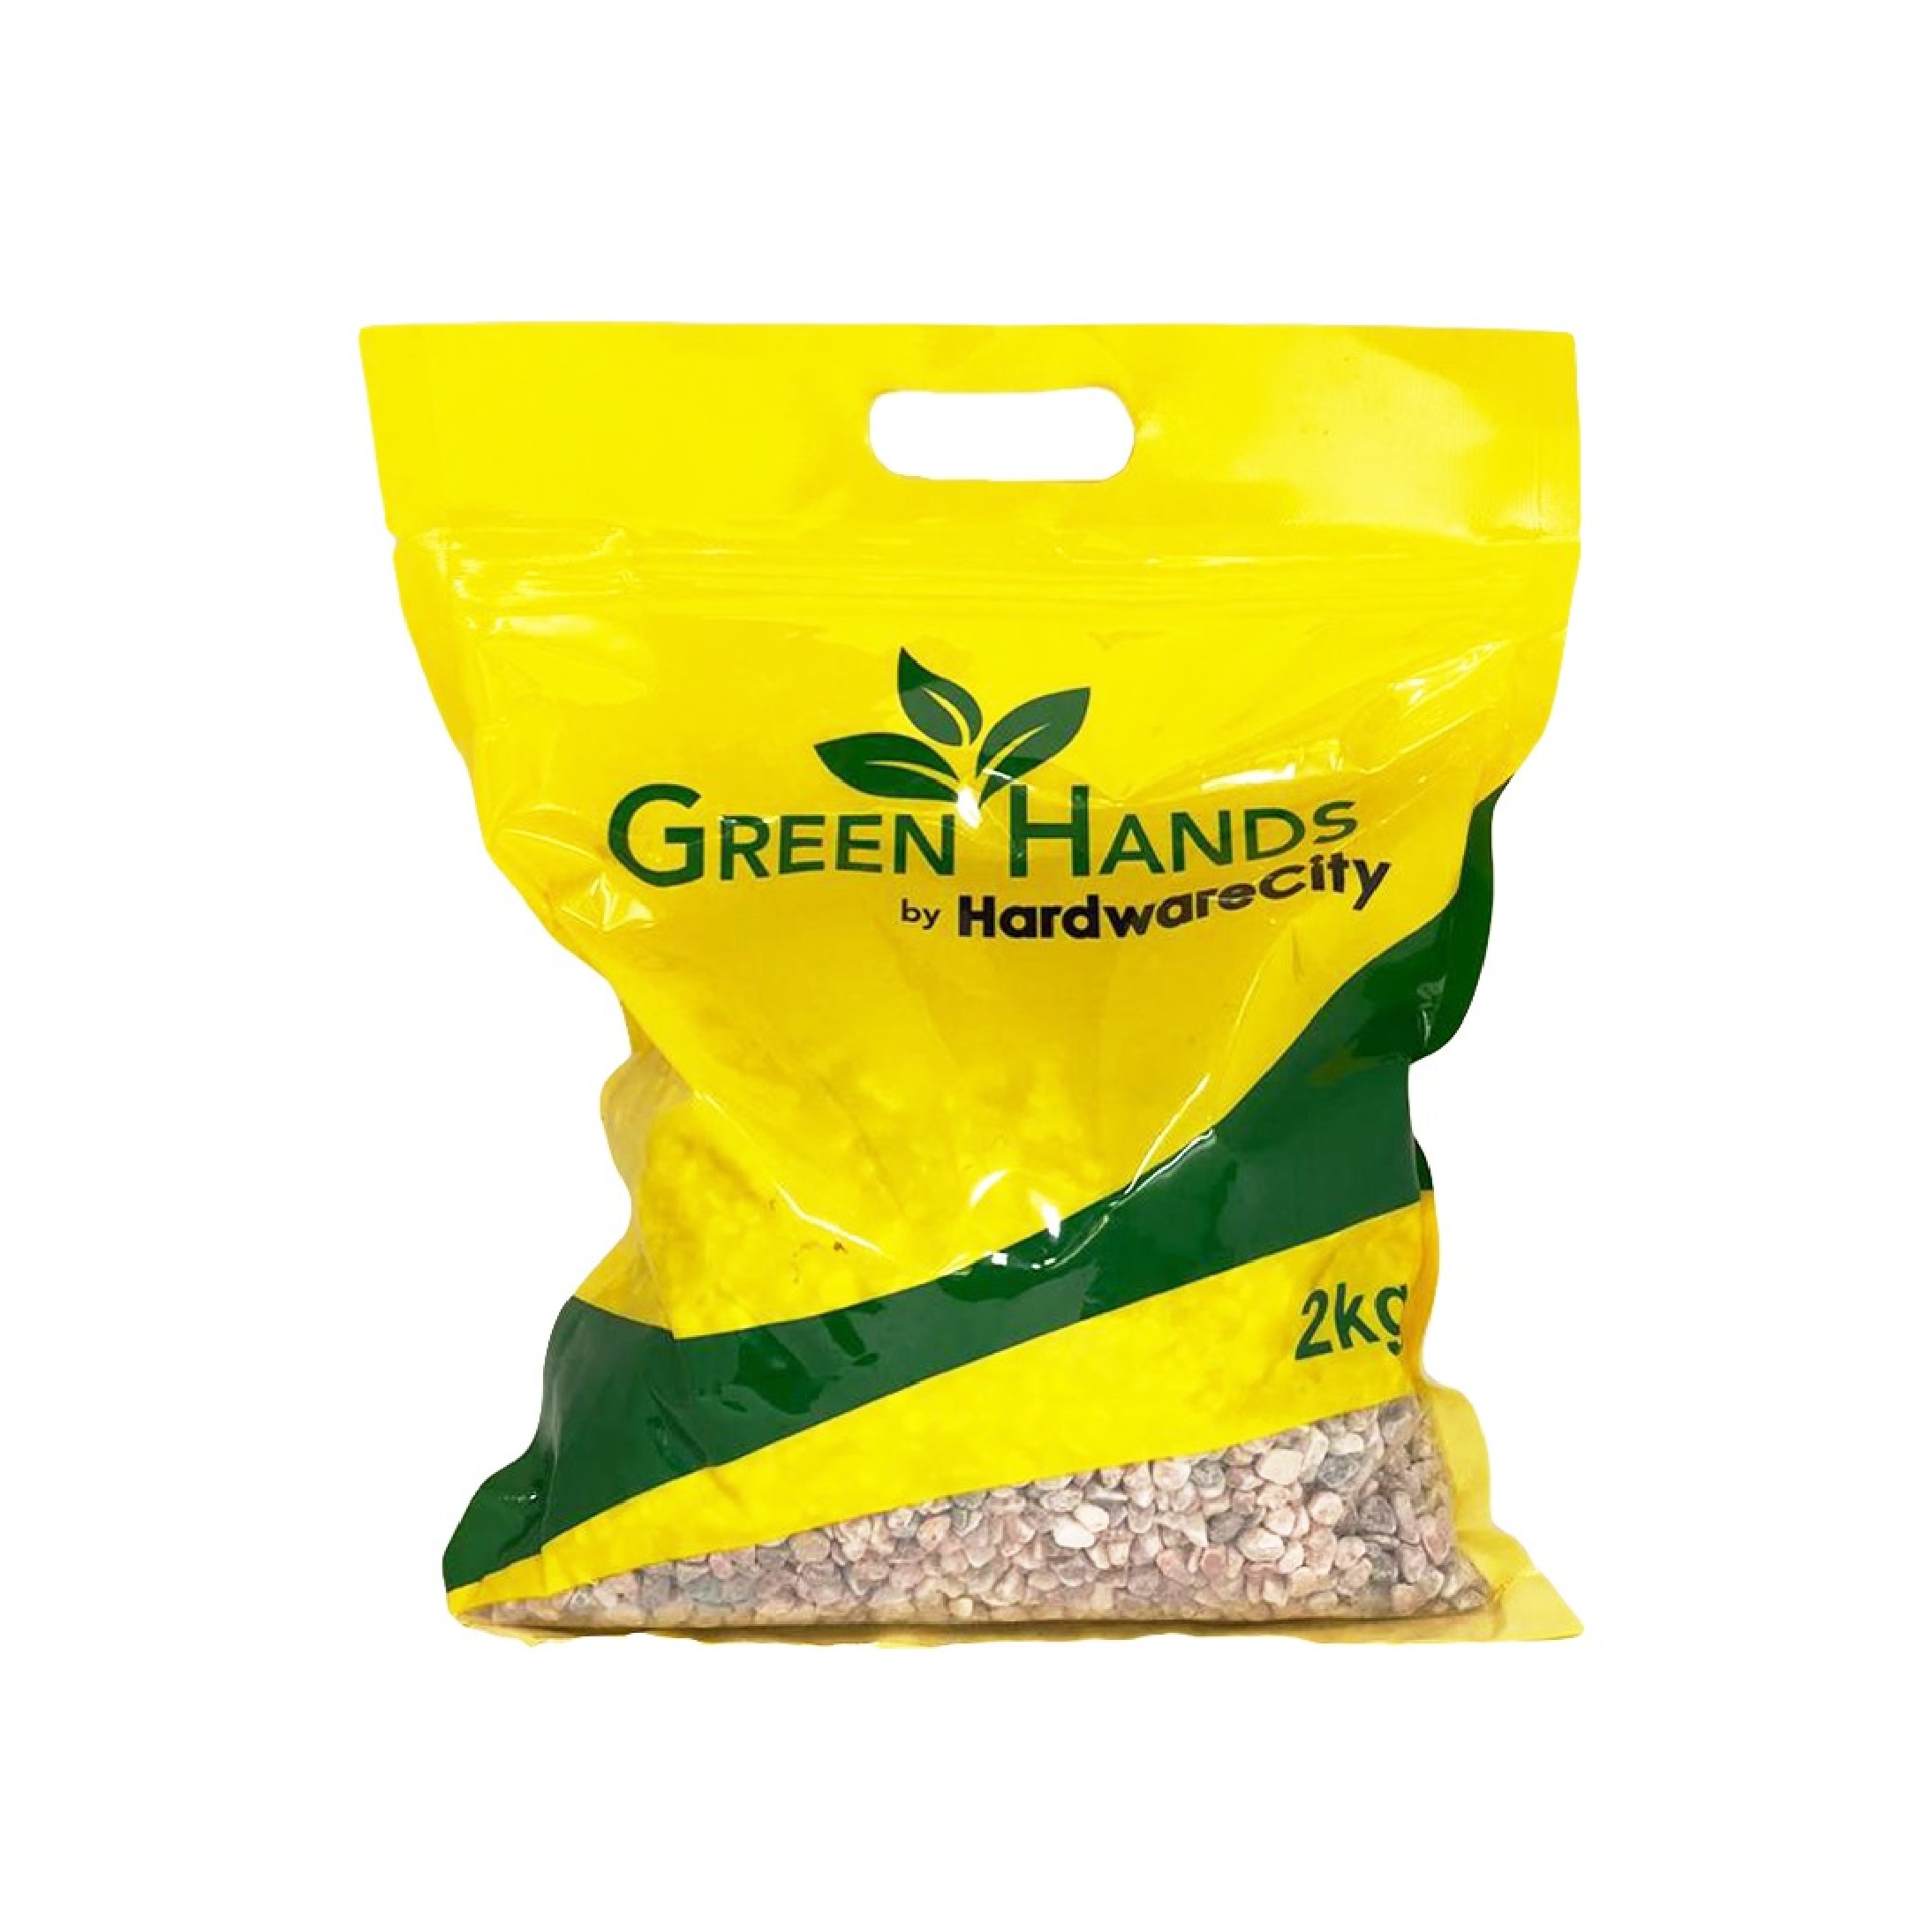 Green Hands Dark Brown (Mixed Colors) Gardening Chipping Pebbles 2KG